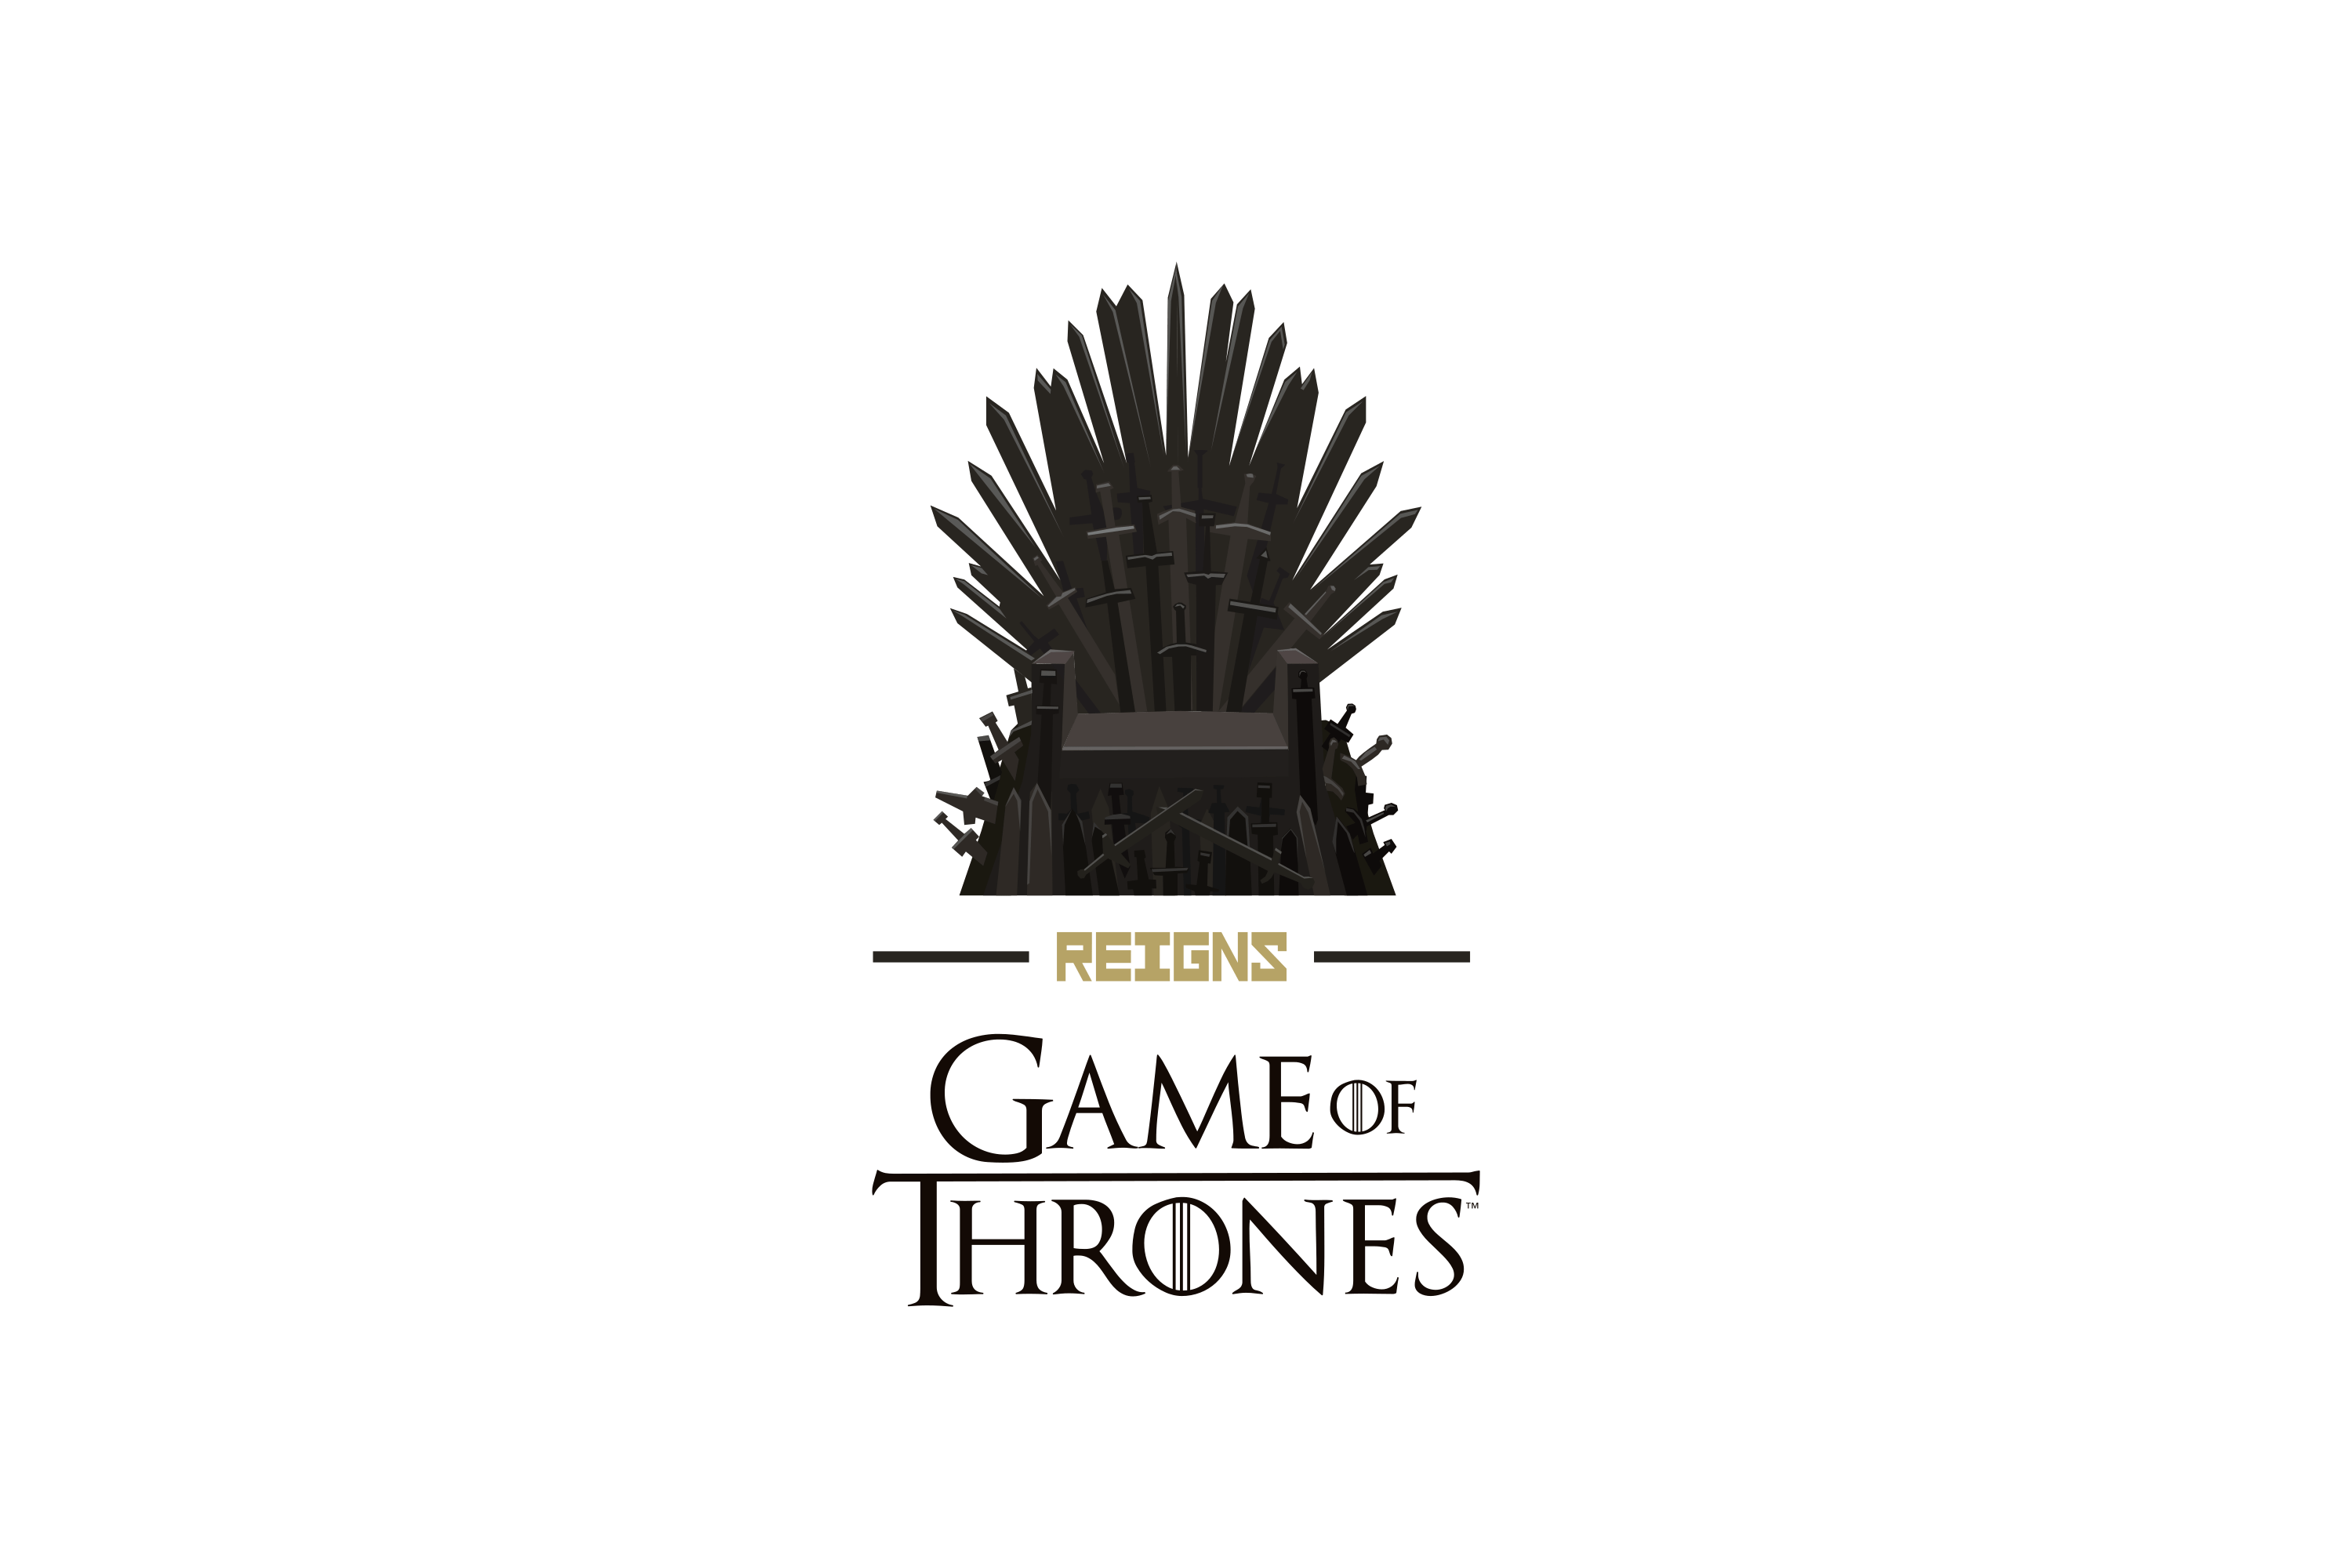 Download Reigns: Game of Thrones Logo in SVG Vector or PNG File